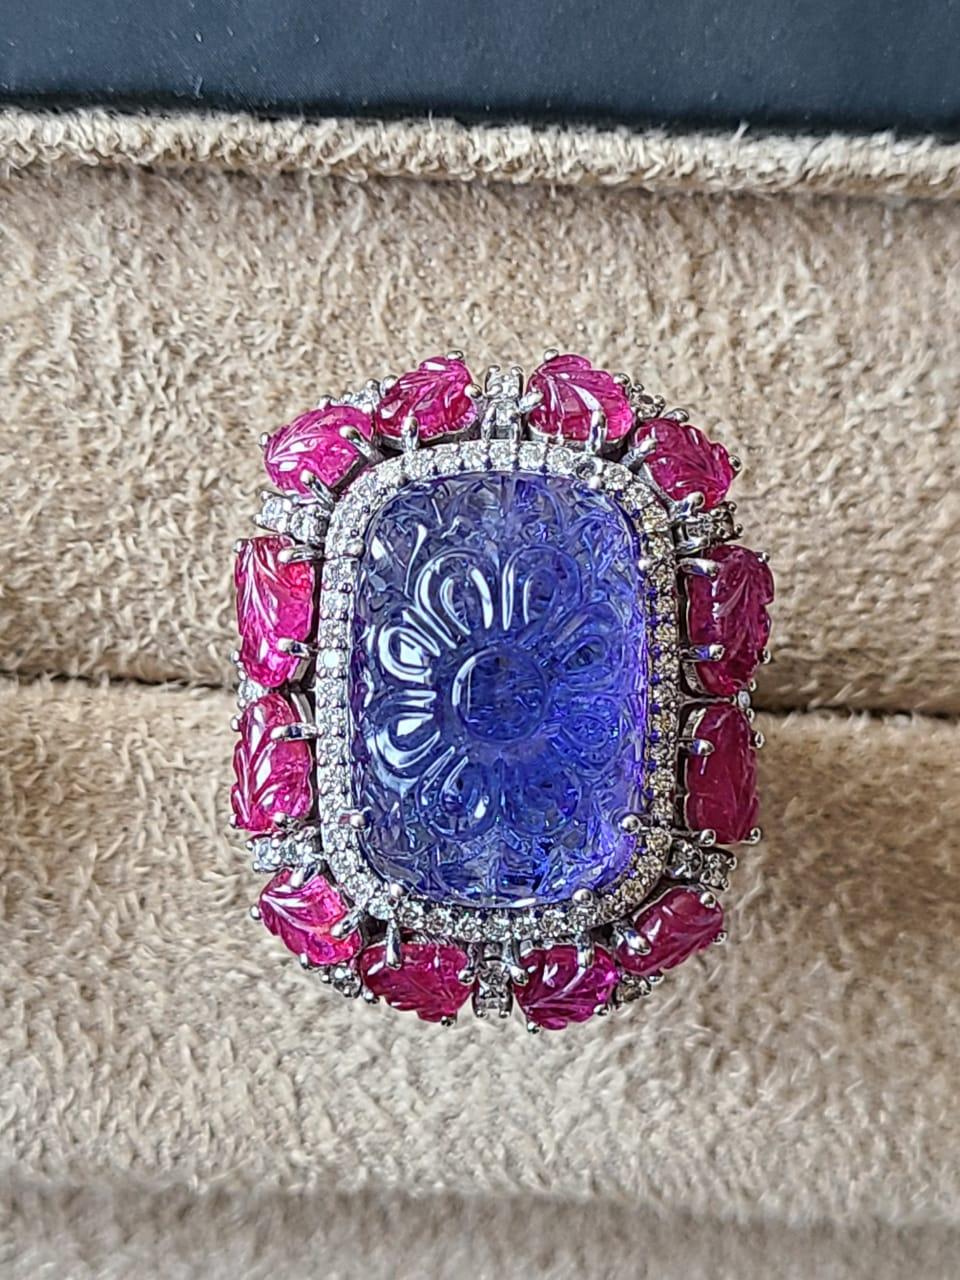 A very wearable and one of a kind, carved Tanzanite & Ruby cocktail Ring set in 18K Gold & Diamonds. The weight of the carved Tanzanite is 21.67 carats and originates from Tanzania. The Tanzanite is completely natural, without any treatment. The